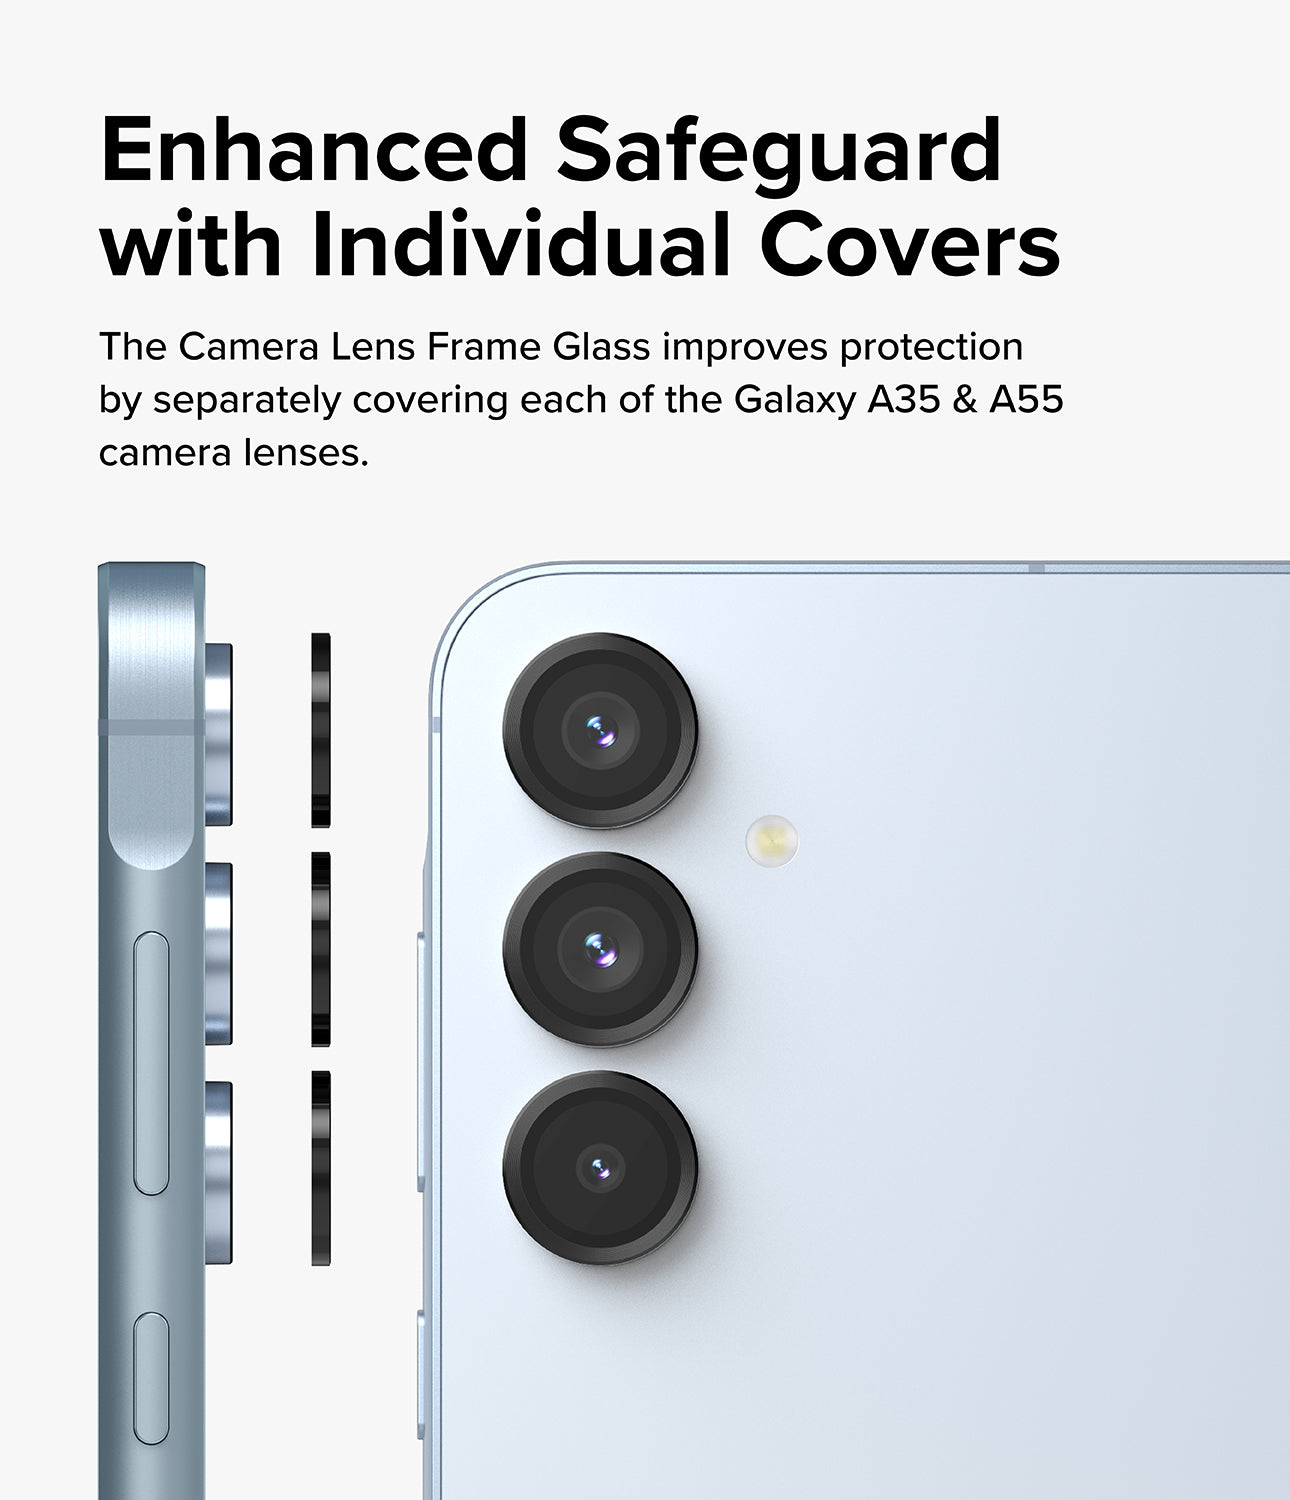 Galaxy A55 / A35 Camera Lens Frame Glass Protector - Enhanced Safeguard with Individual Covers. The camera Lens Frame Glass improves protection by separately covering each of the Galaxy A35 and A55 camera lenses.